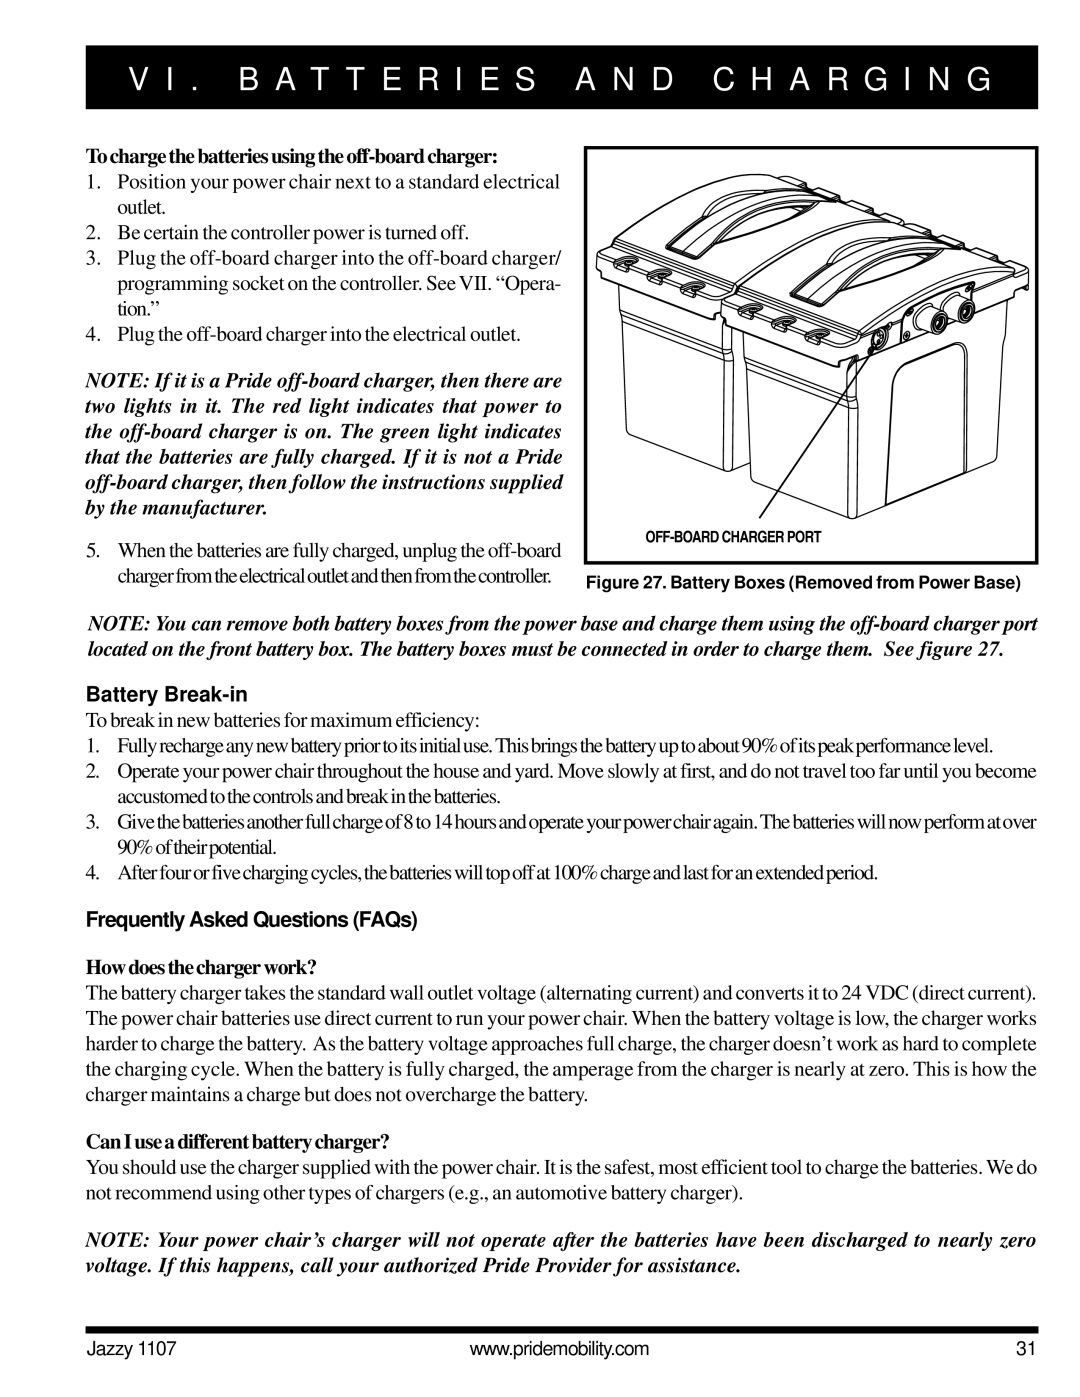 Pride Mobility 1107 owner manual Battery Break-in, Frequently Asked Questions FAQs 